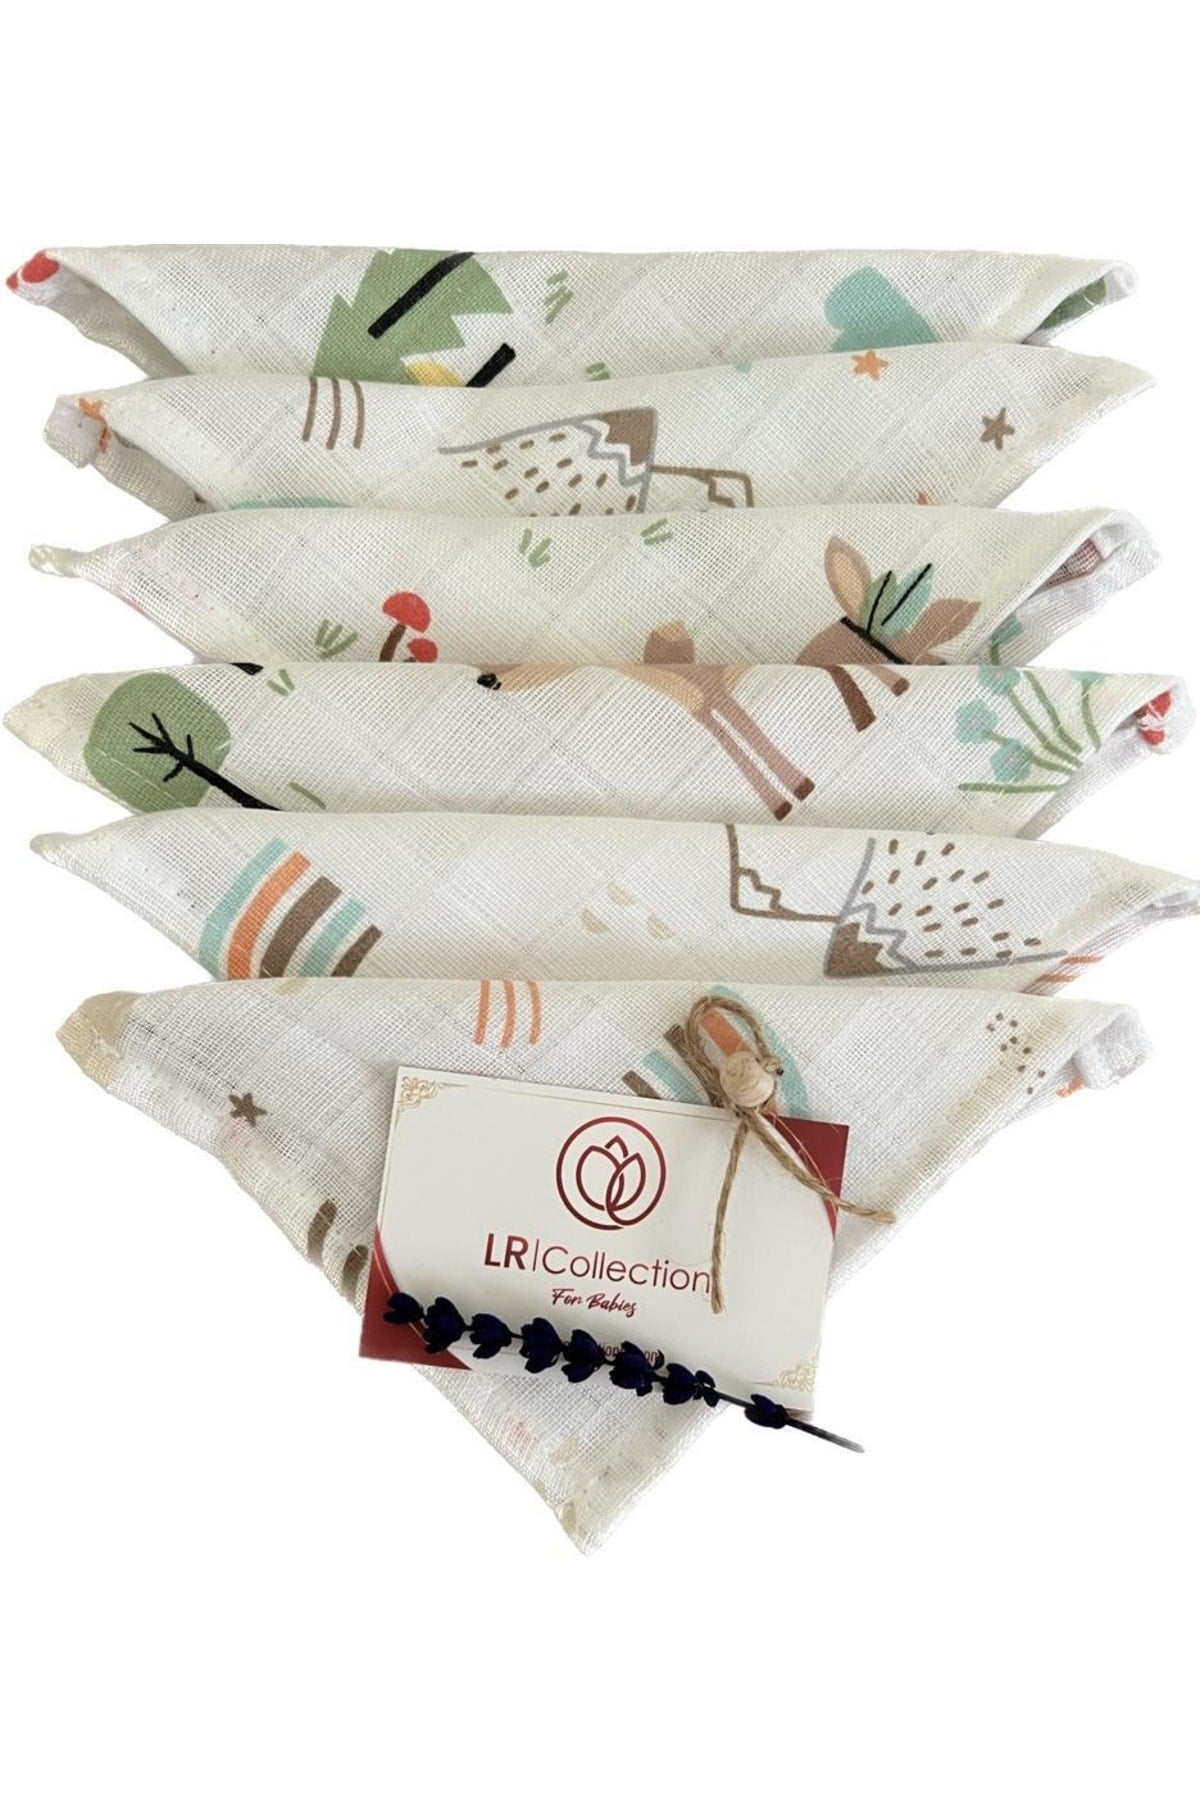 6 Piece Muslin Mouth Wipes Made of 100% Cotton Muslin Fabric